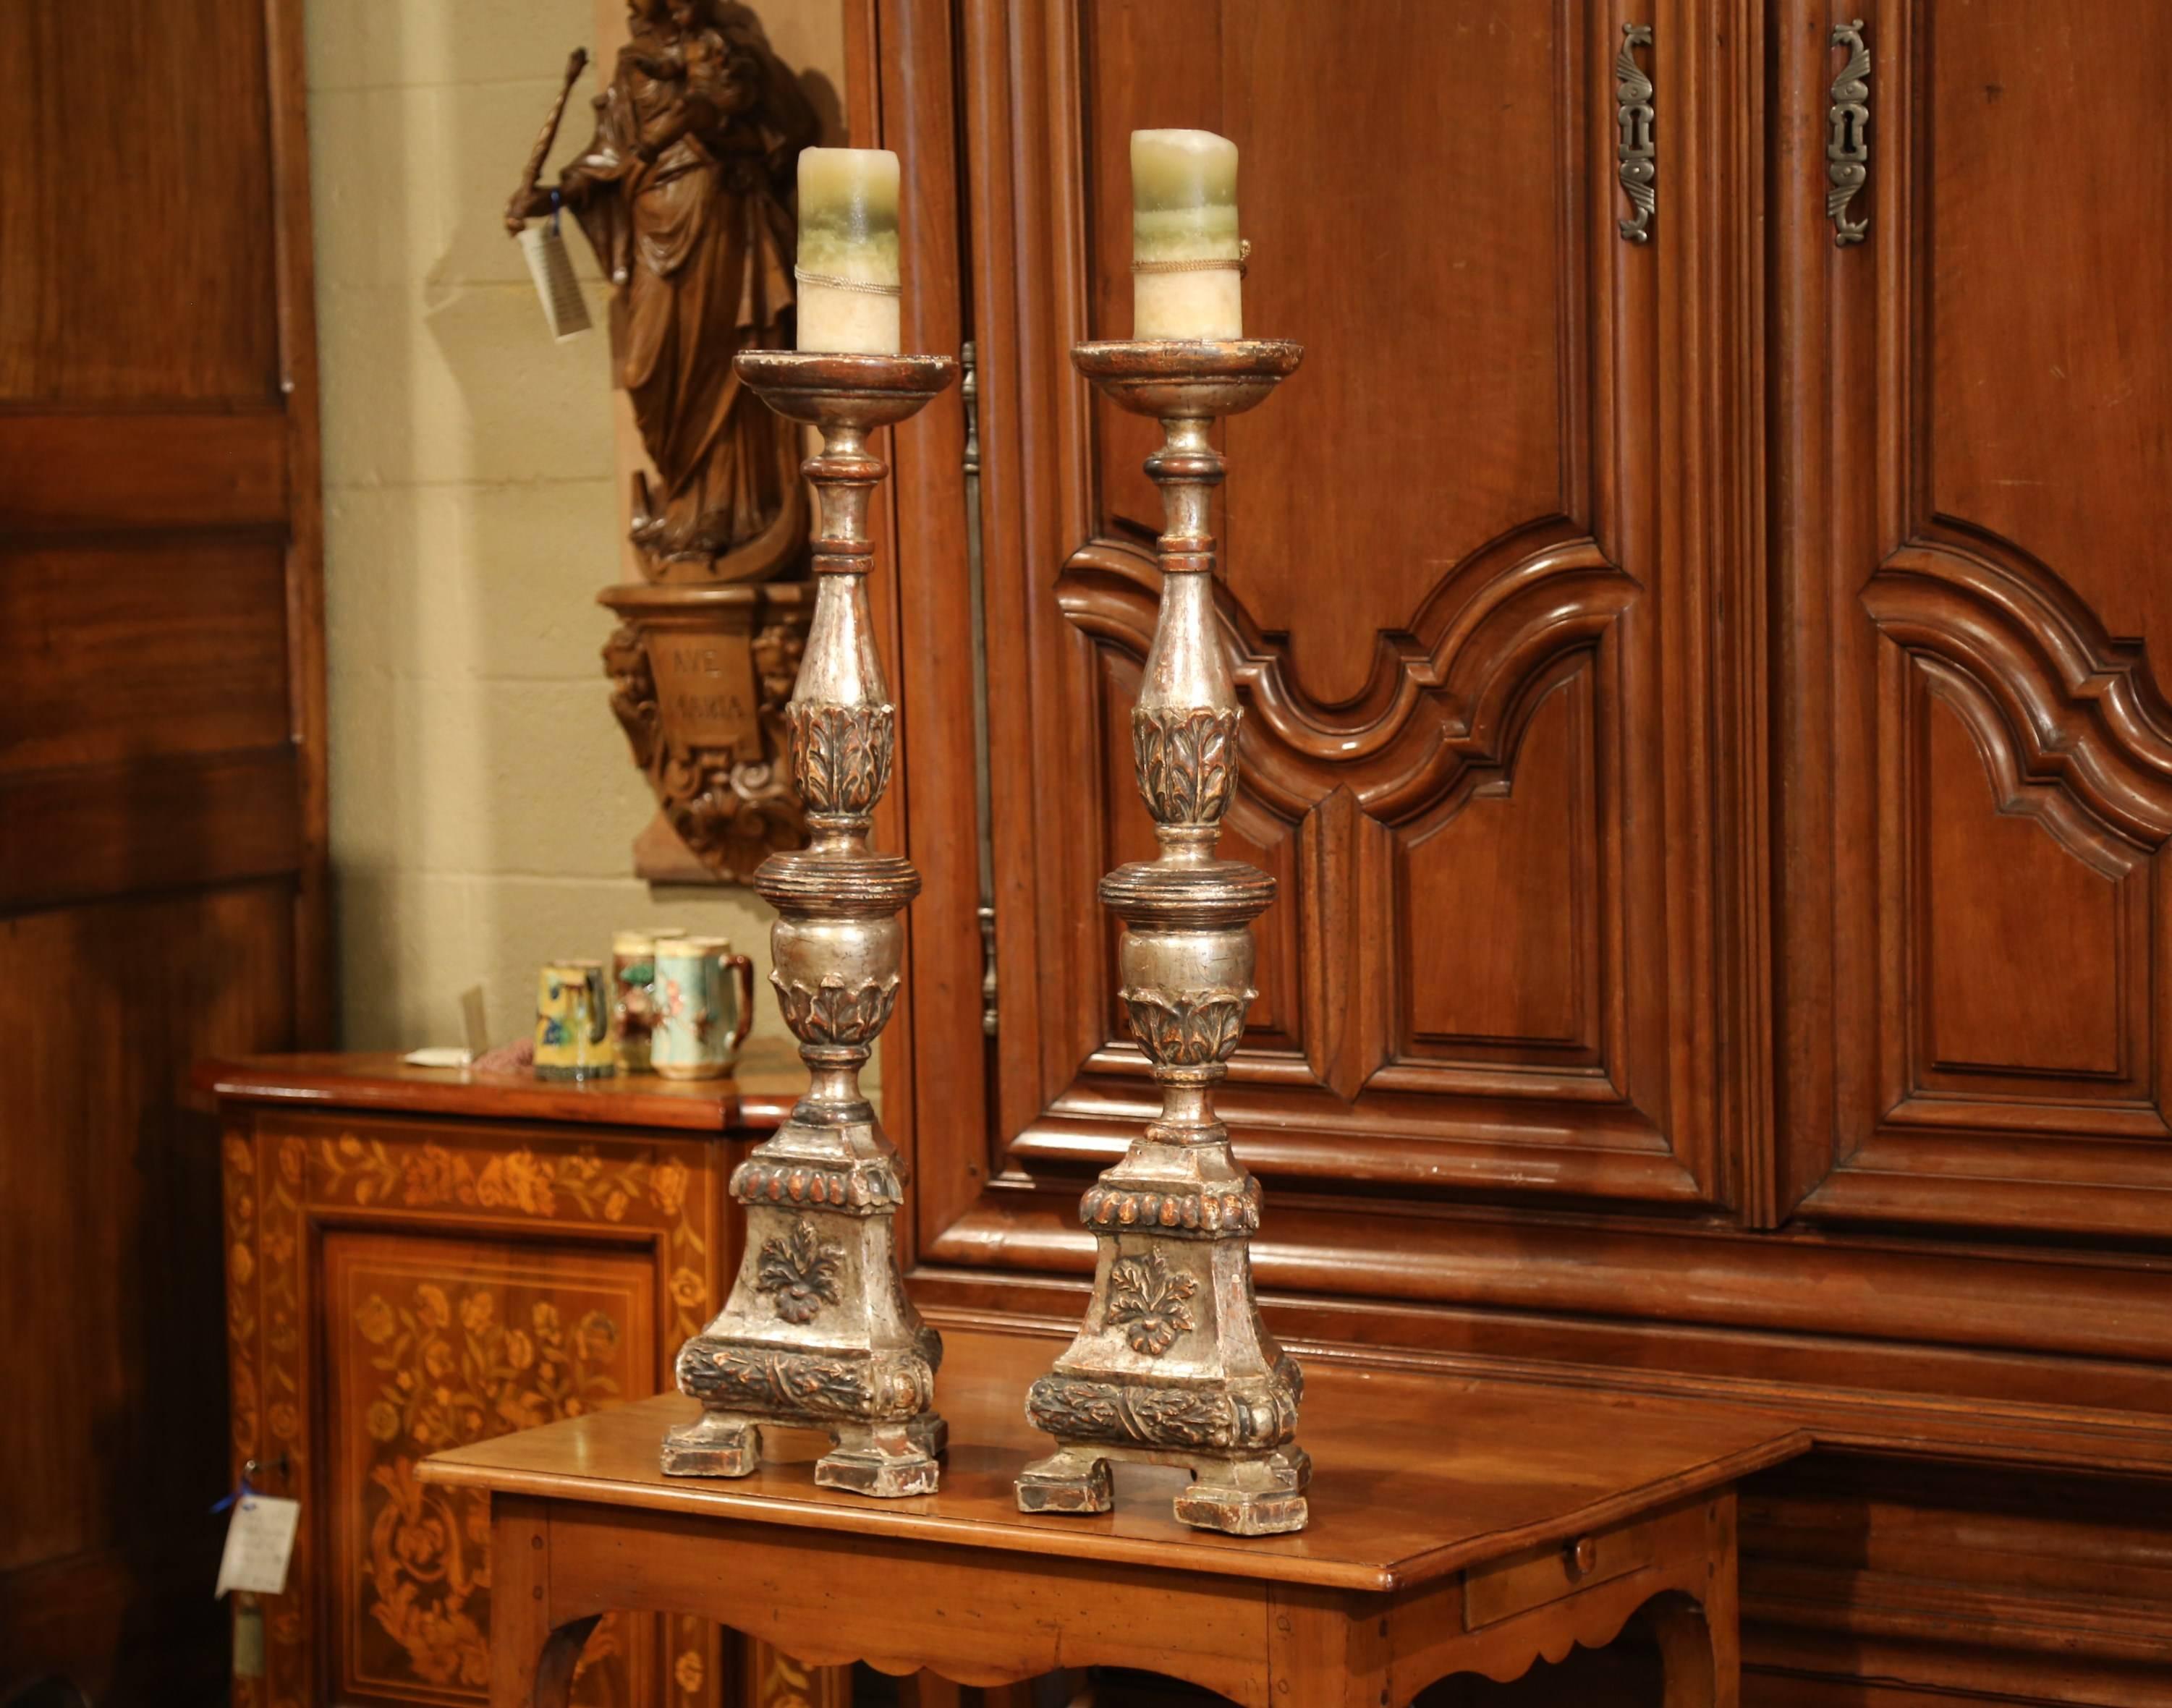 These tall Pic-Cierges were created in Italy, circa 1880. Standing on three small, square feet over a triangle base decorated with flower medallions on all three sides, each candlestick has a carved stem embellished with acanthus leaves and an iron